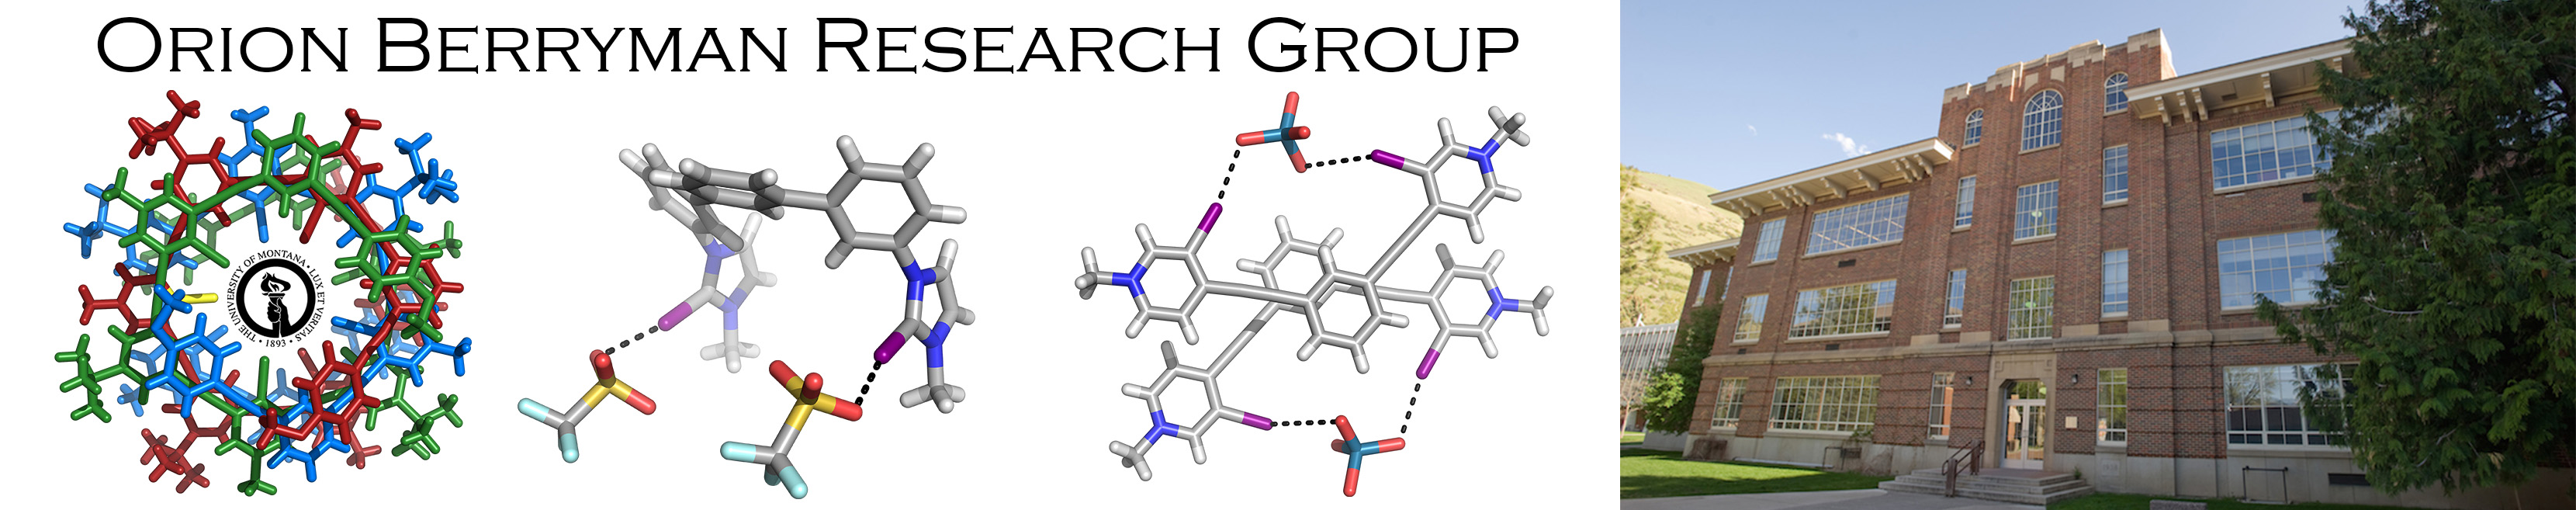 Orion Berryman Research Group